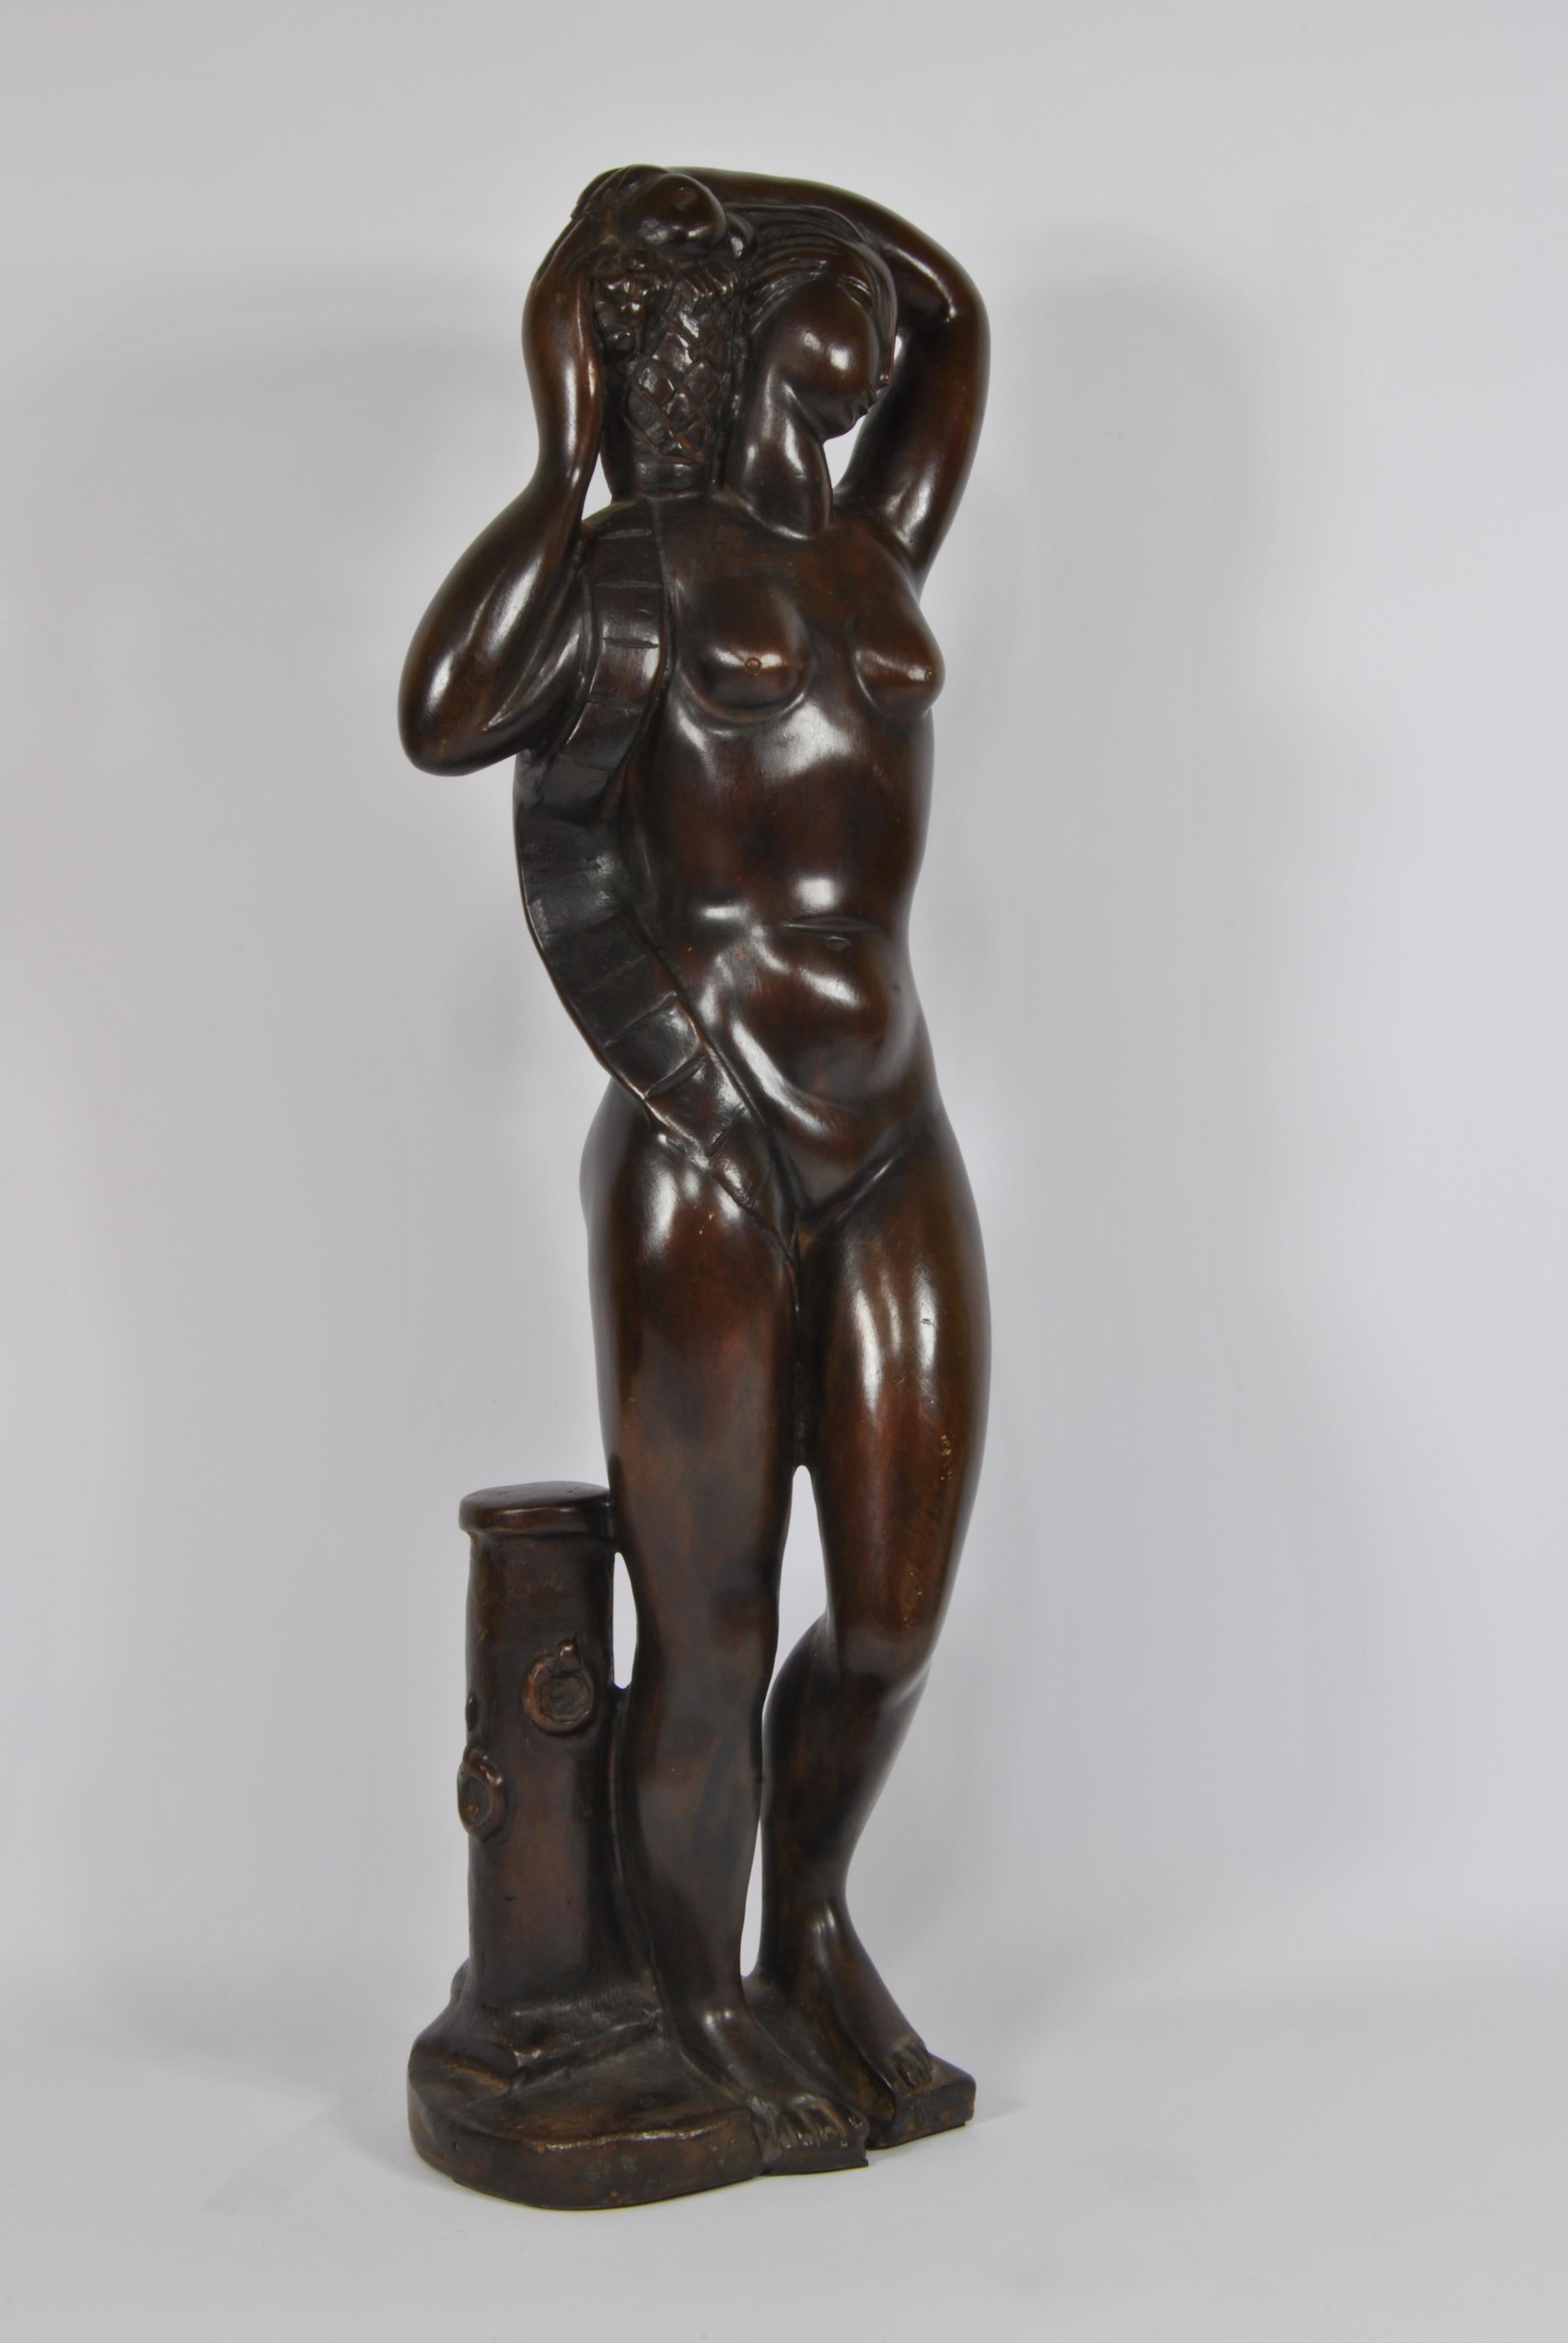 French Art Deco Sculpture Entirely in Bronze, Signed by the Sculptor Celano France 1940 For Sale